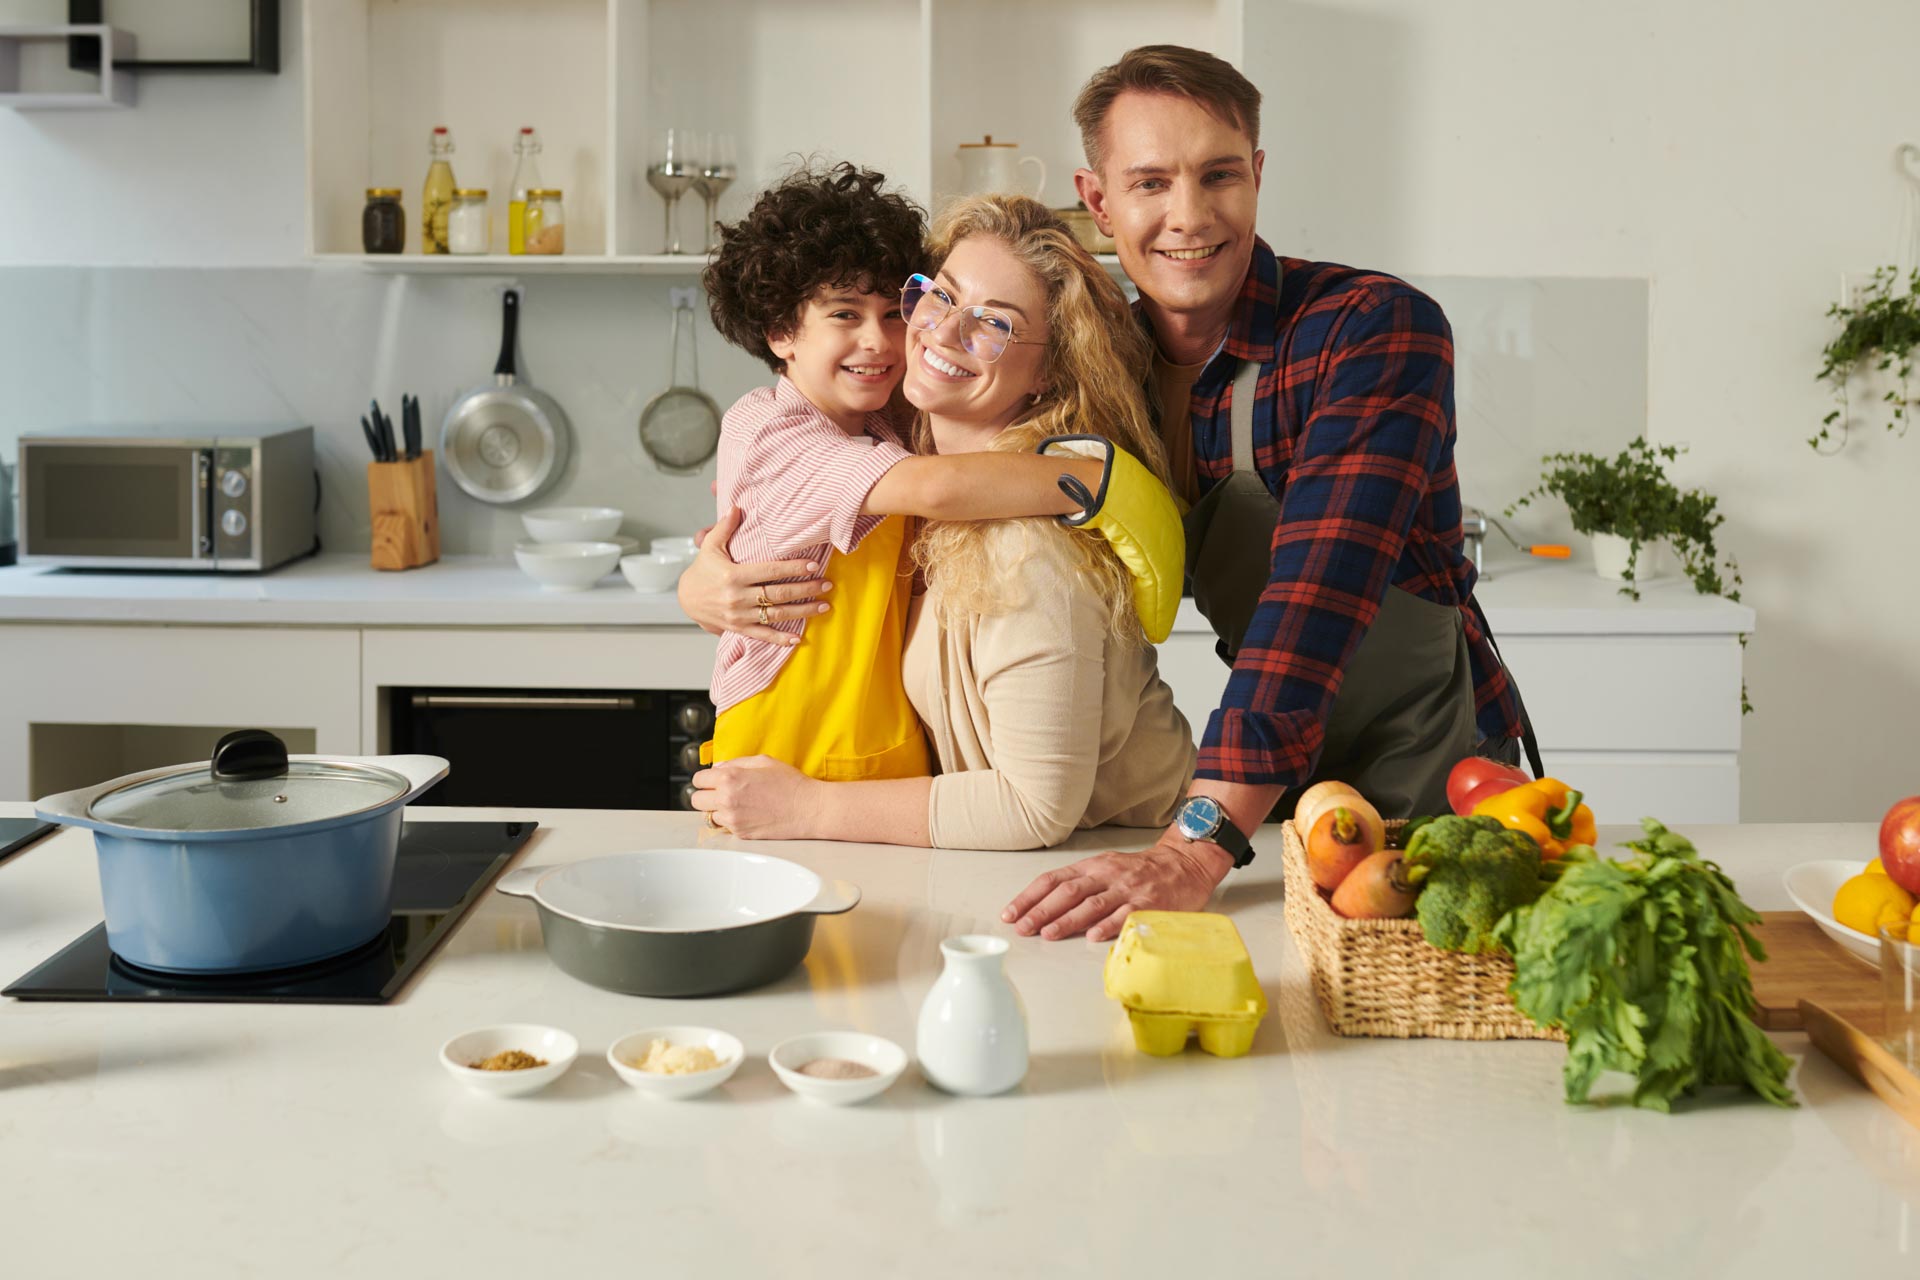 A happy family embracing in a home kitchen filled with fresh ingredients and cooking utensils, where the latest plumbing and water services ensure a seamless cooking experience.